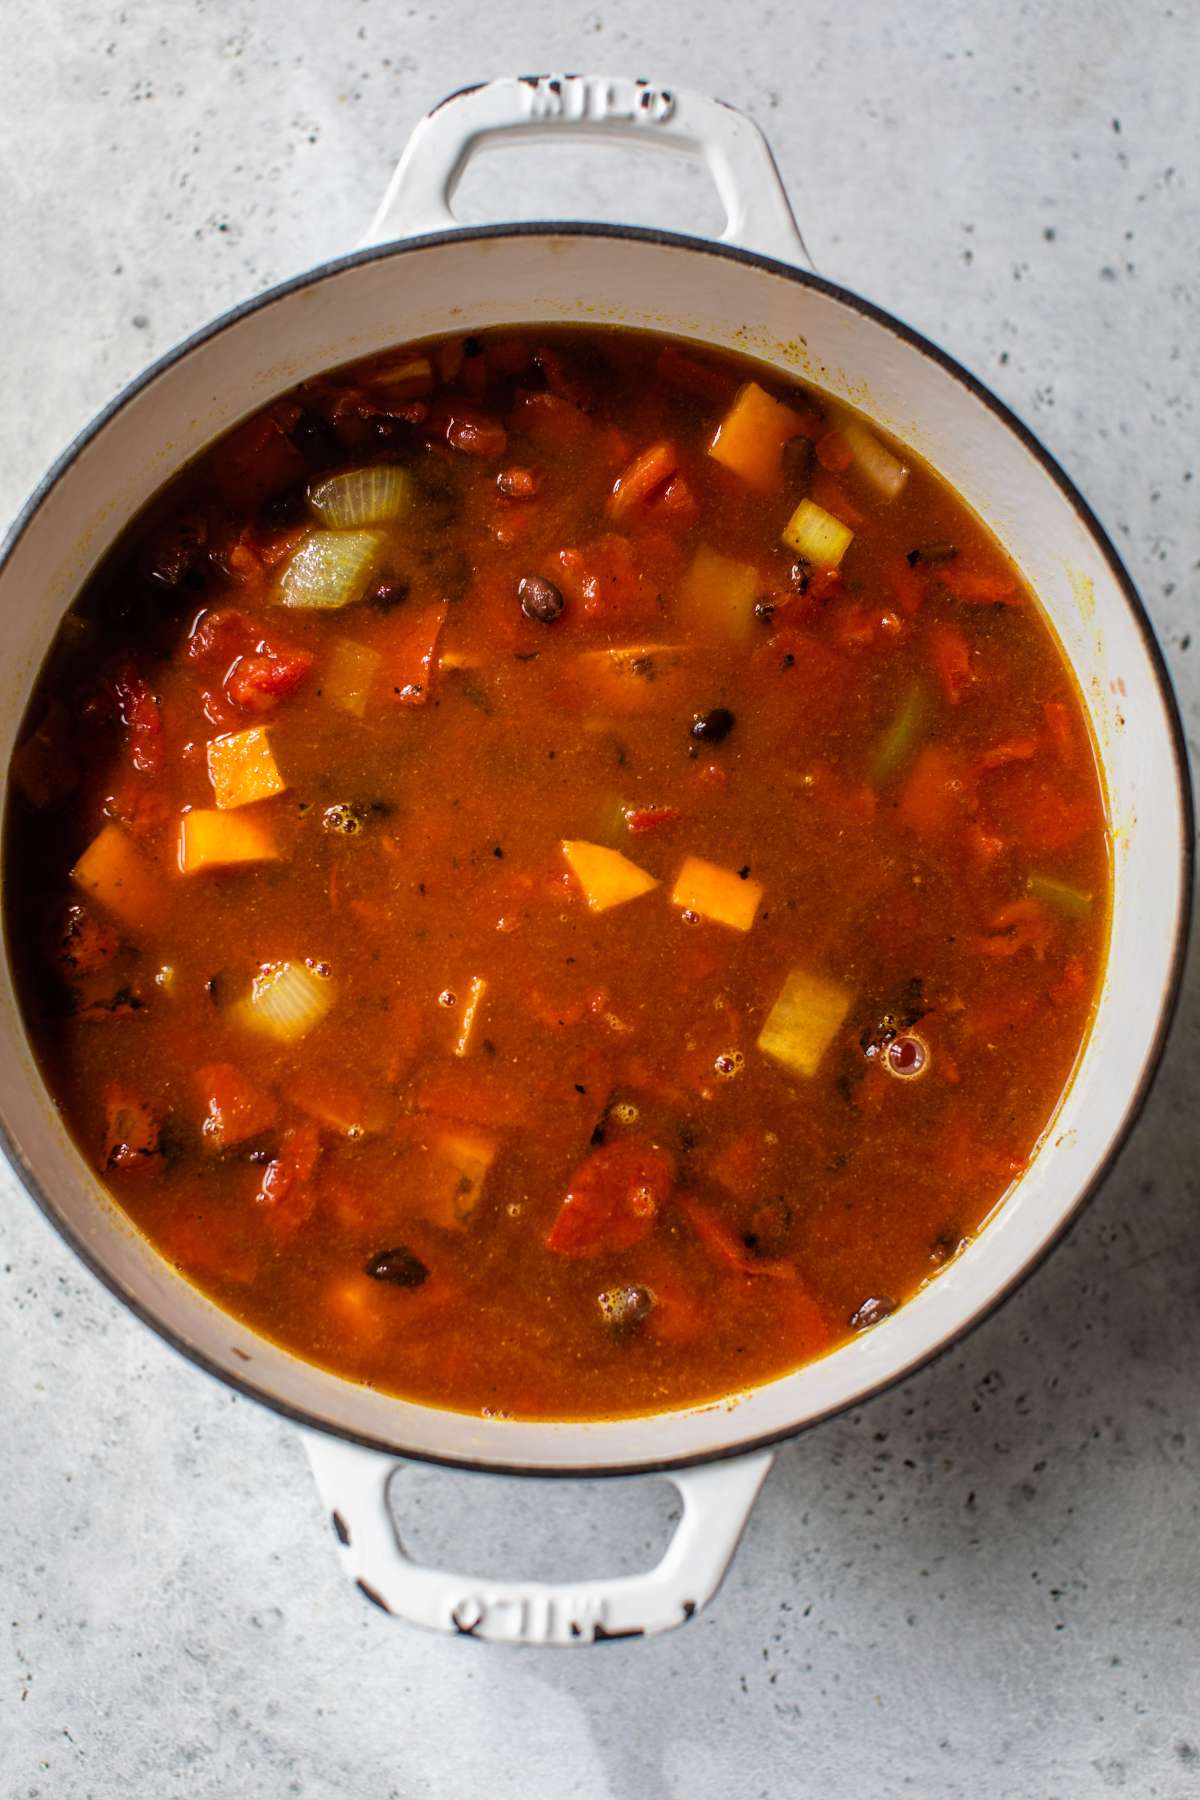 Cooking soup with tomatoes, sweet potato and black beans.